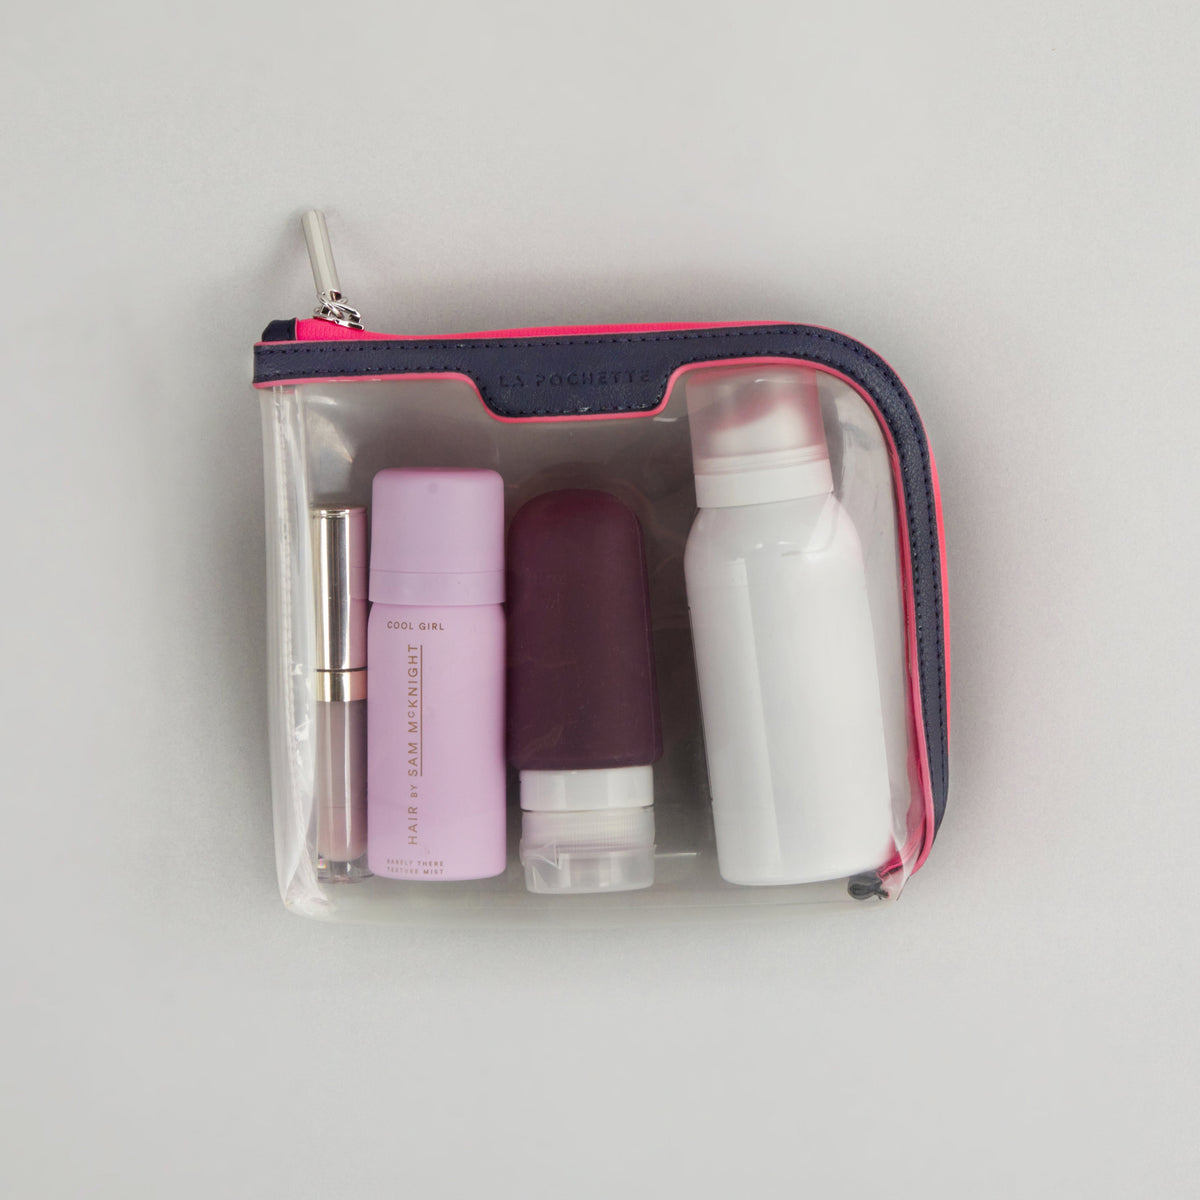 Small Anywhere Everywhere Pouch in Midnight Neon Pink colourway containing beauty accessories 